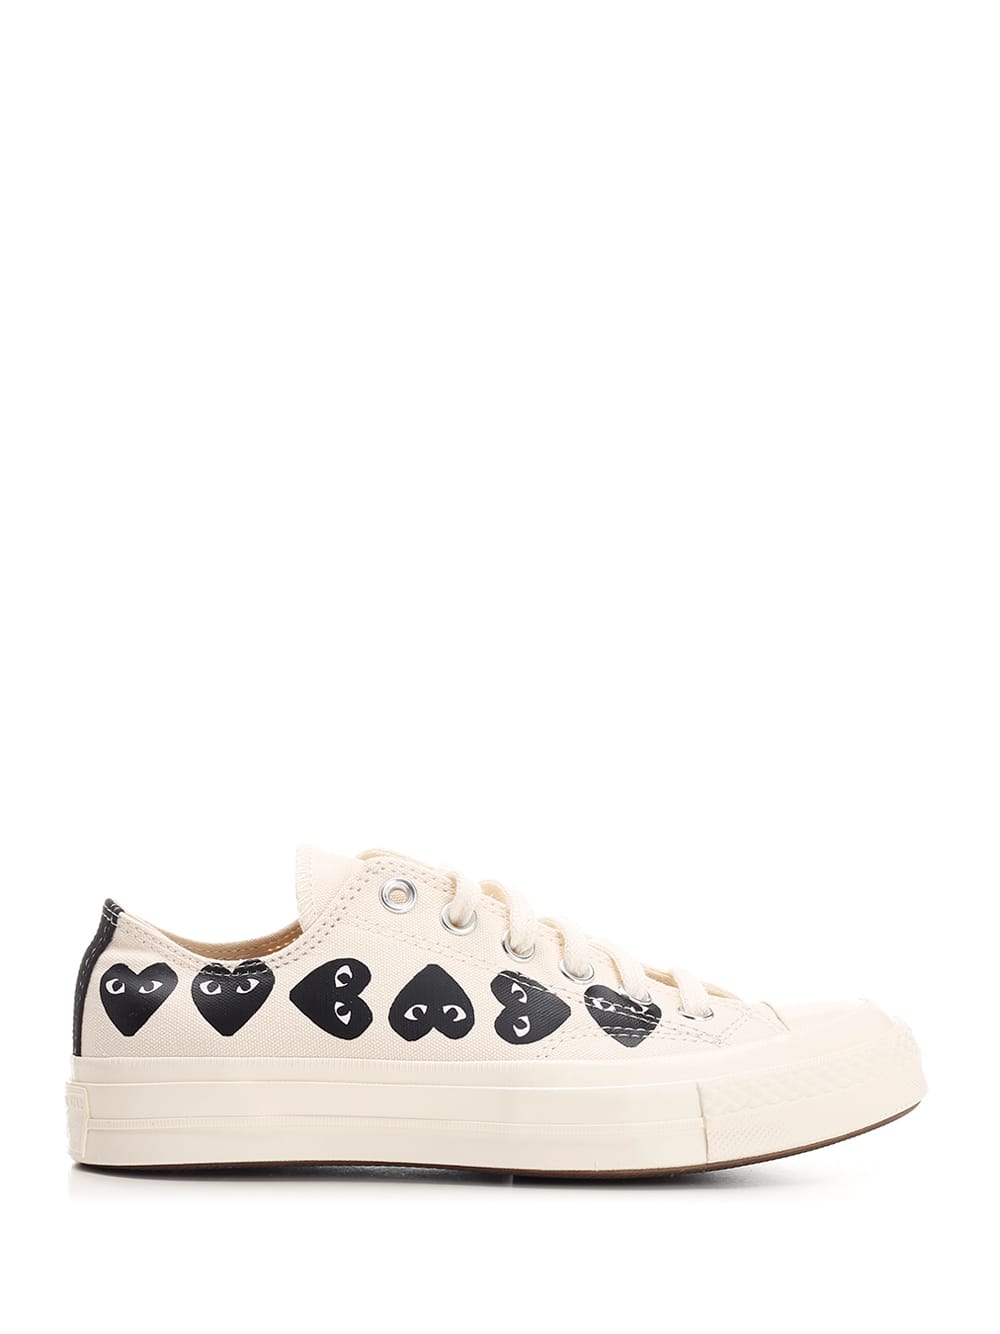 Comme des Garçons Play Ivory chuck 70 Low Sneakers